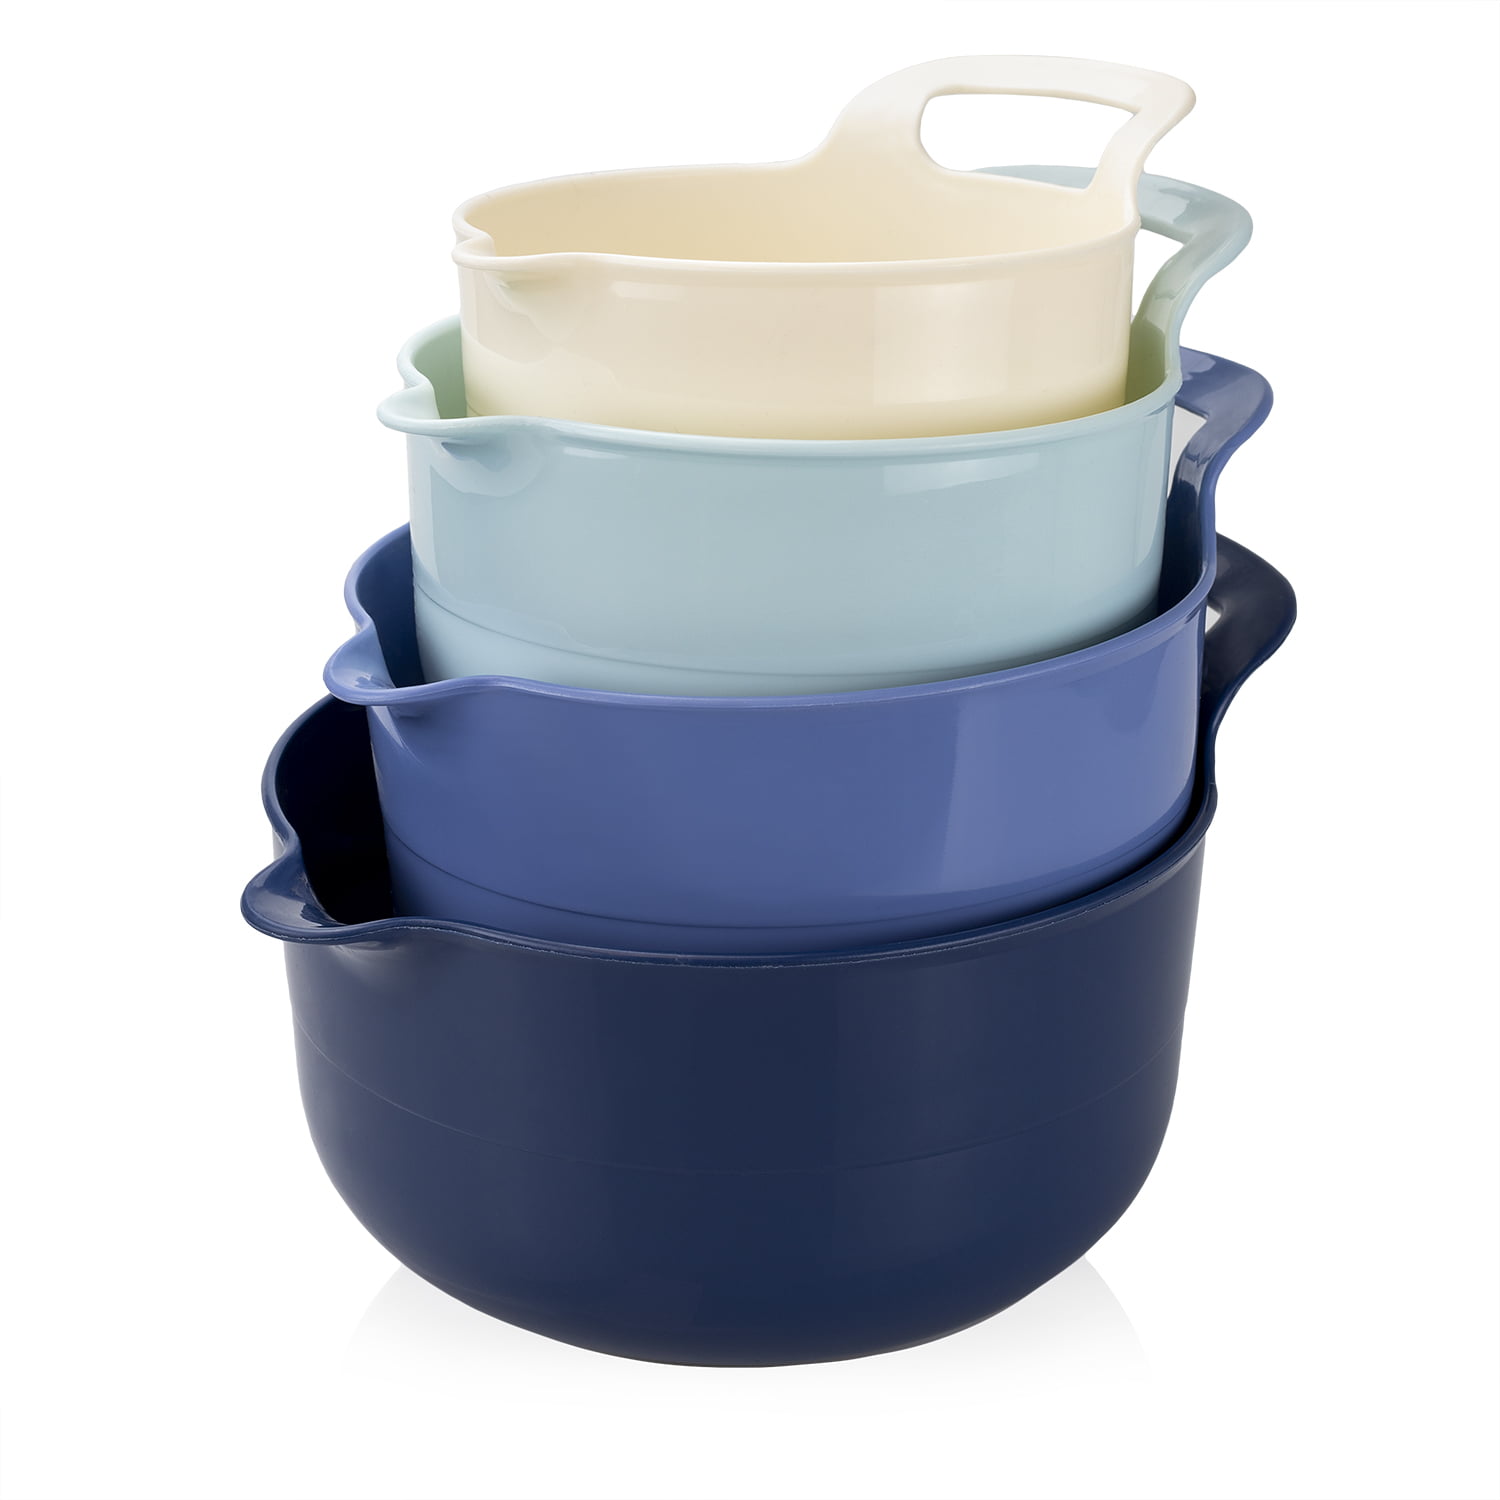 COOK WITH COLOR Mixing Bowls – 4 Piece Nesting Plastic Mixing Bowl